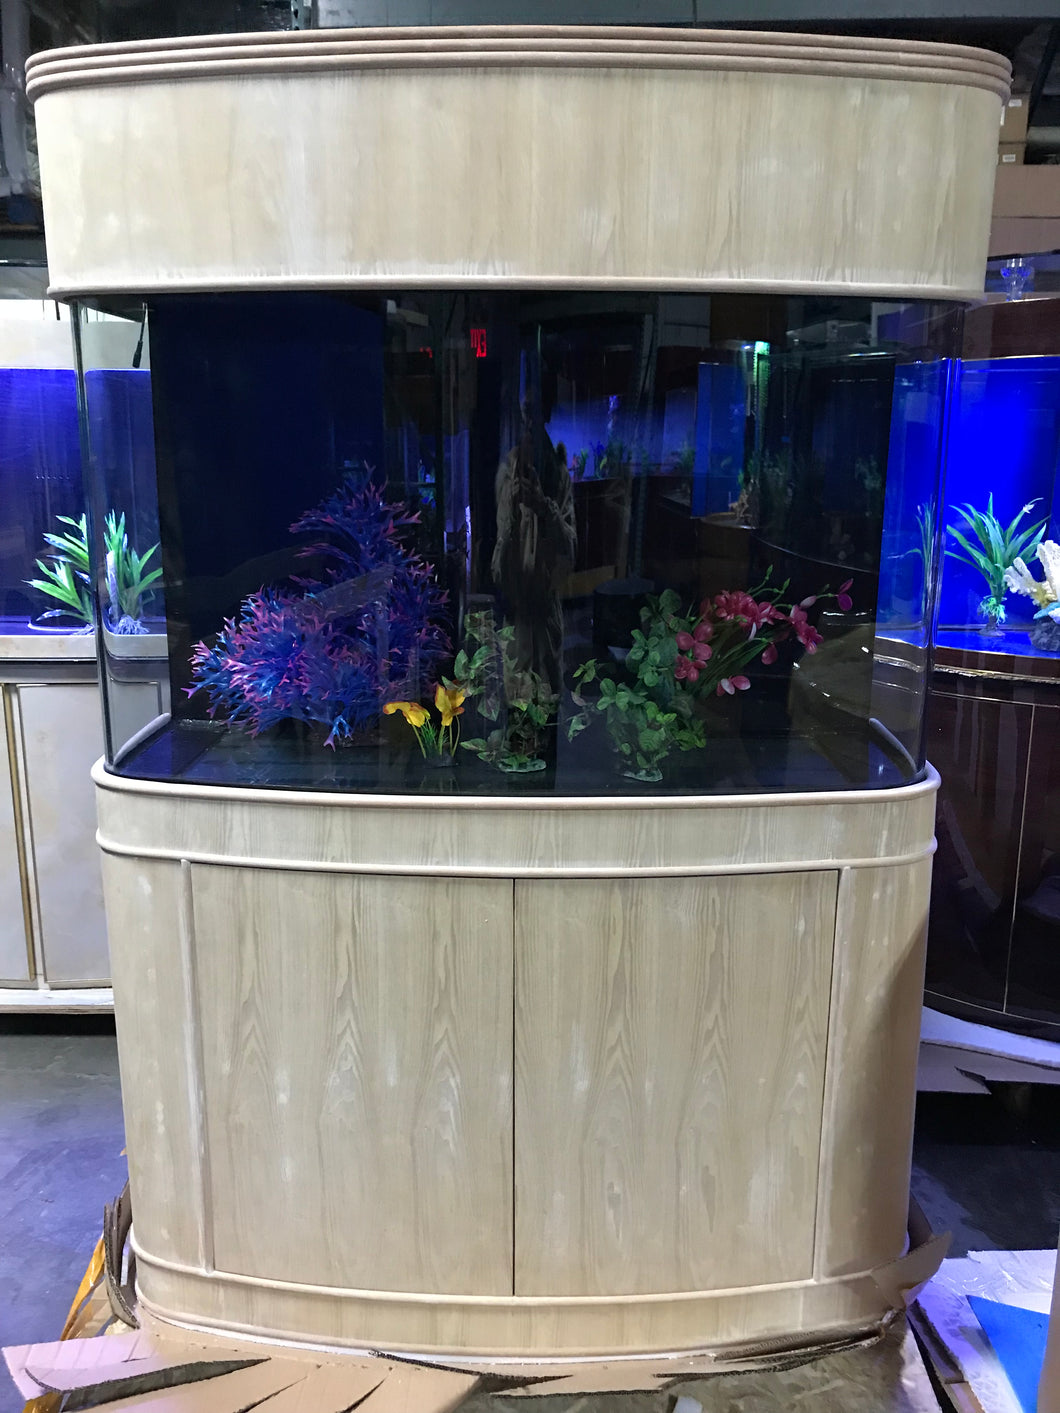 WARRANTY INCLUDED! 140 gallon GLASS bow front aquarium fish tank in cherry wood